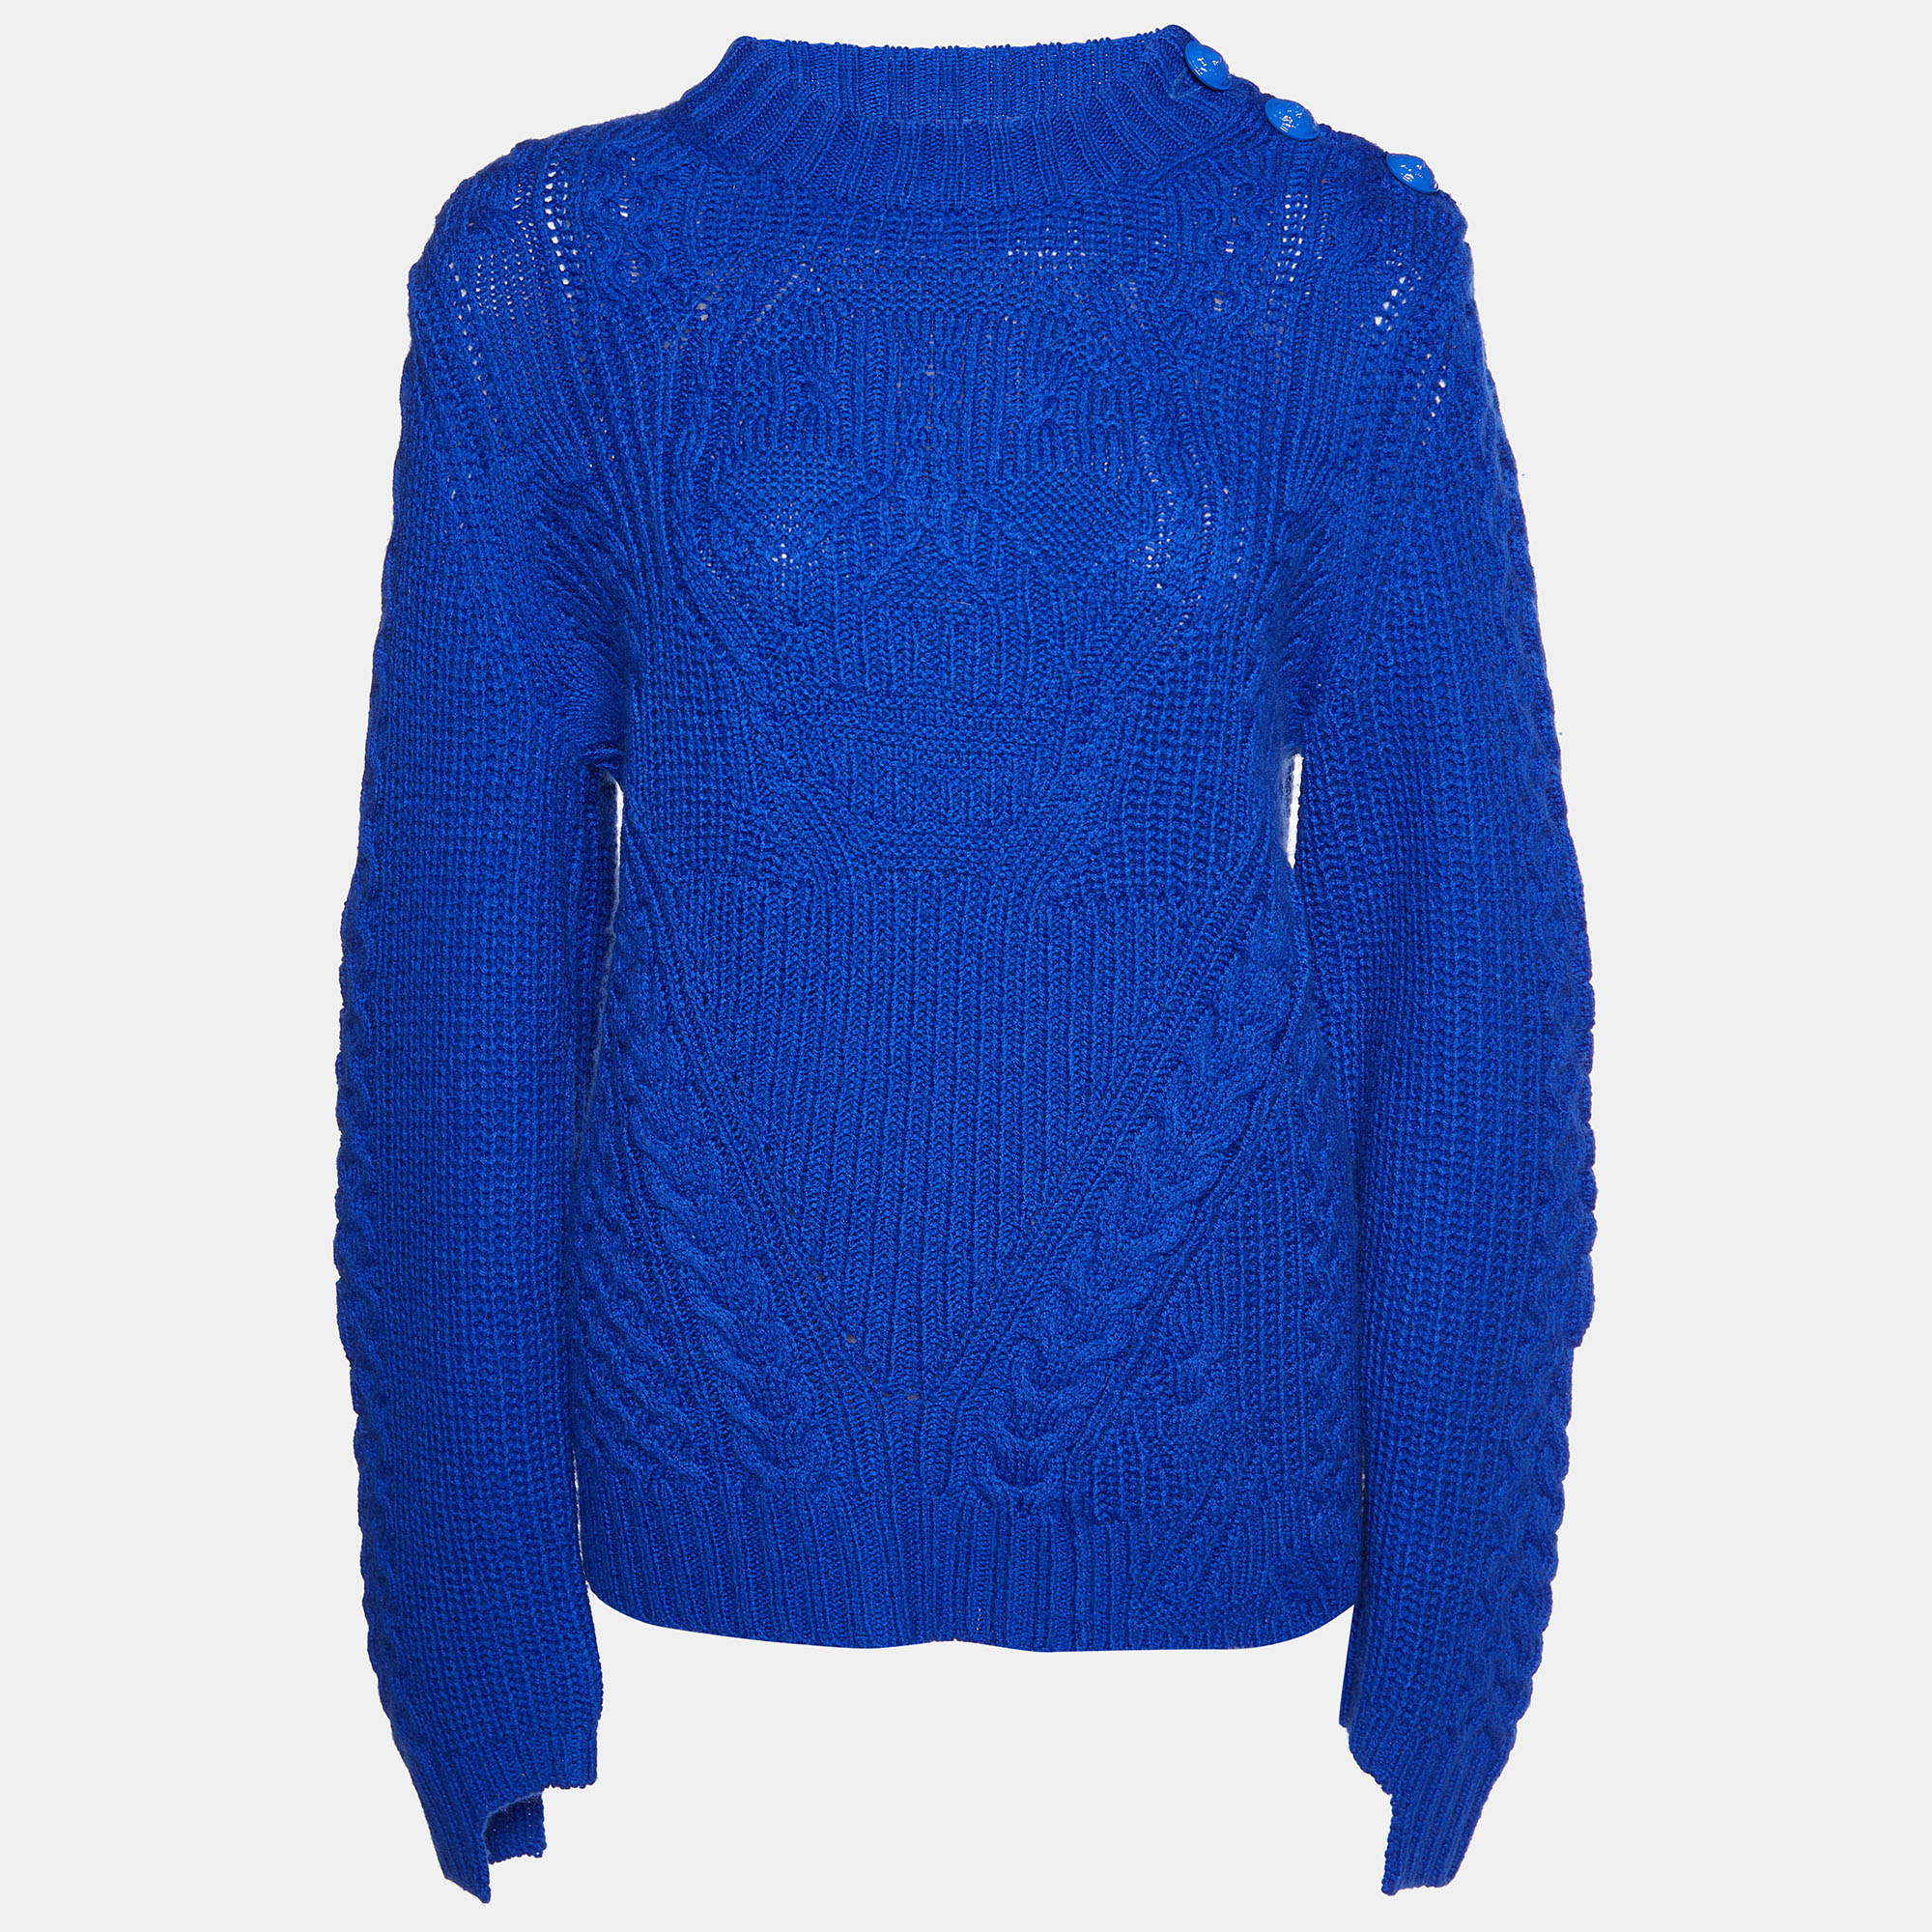 

Zadig & Voltaire Defile Royal Blue Wool Knit Kelly Sweater